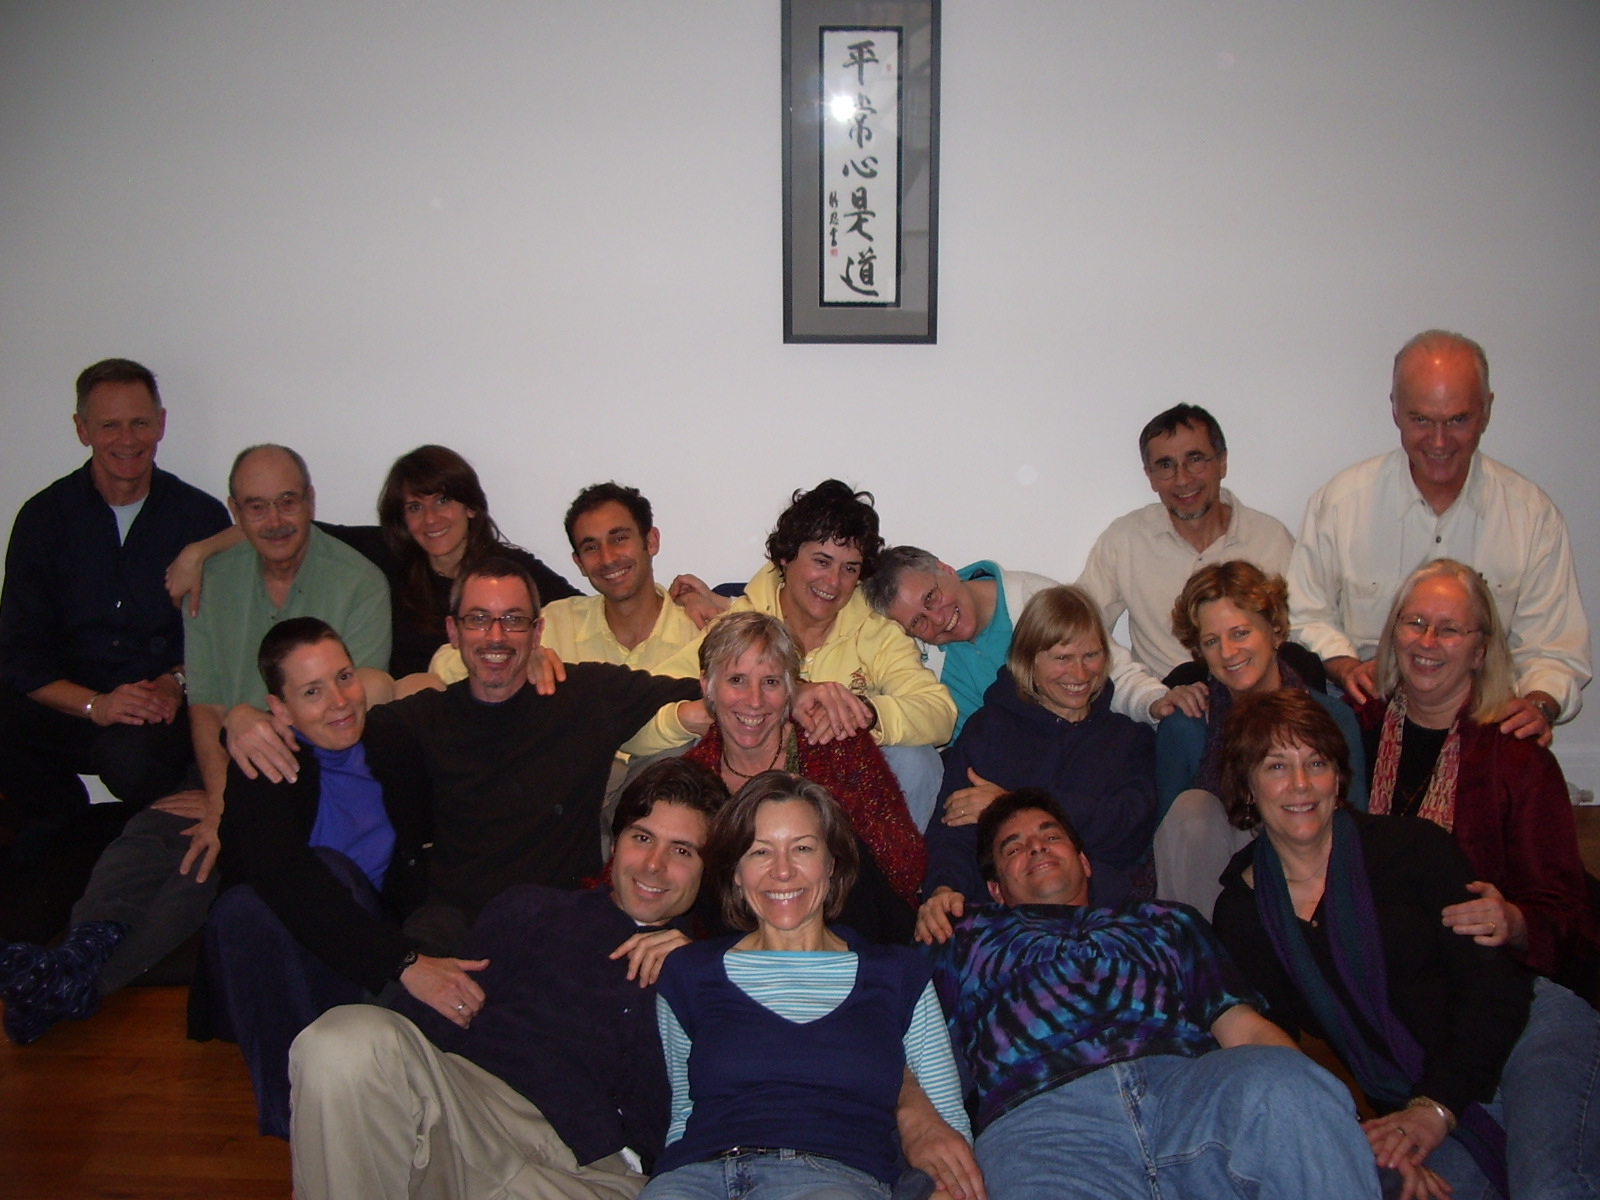 an image of a large group of people that are together